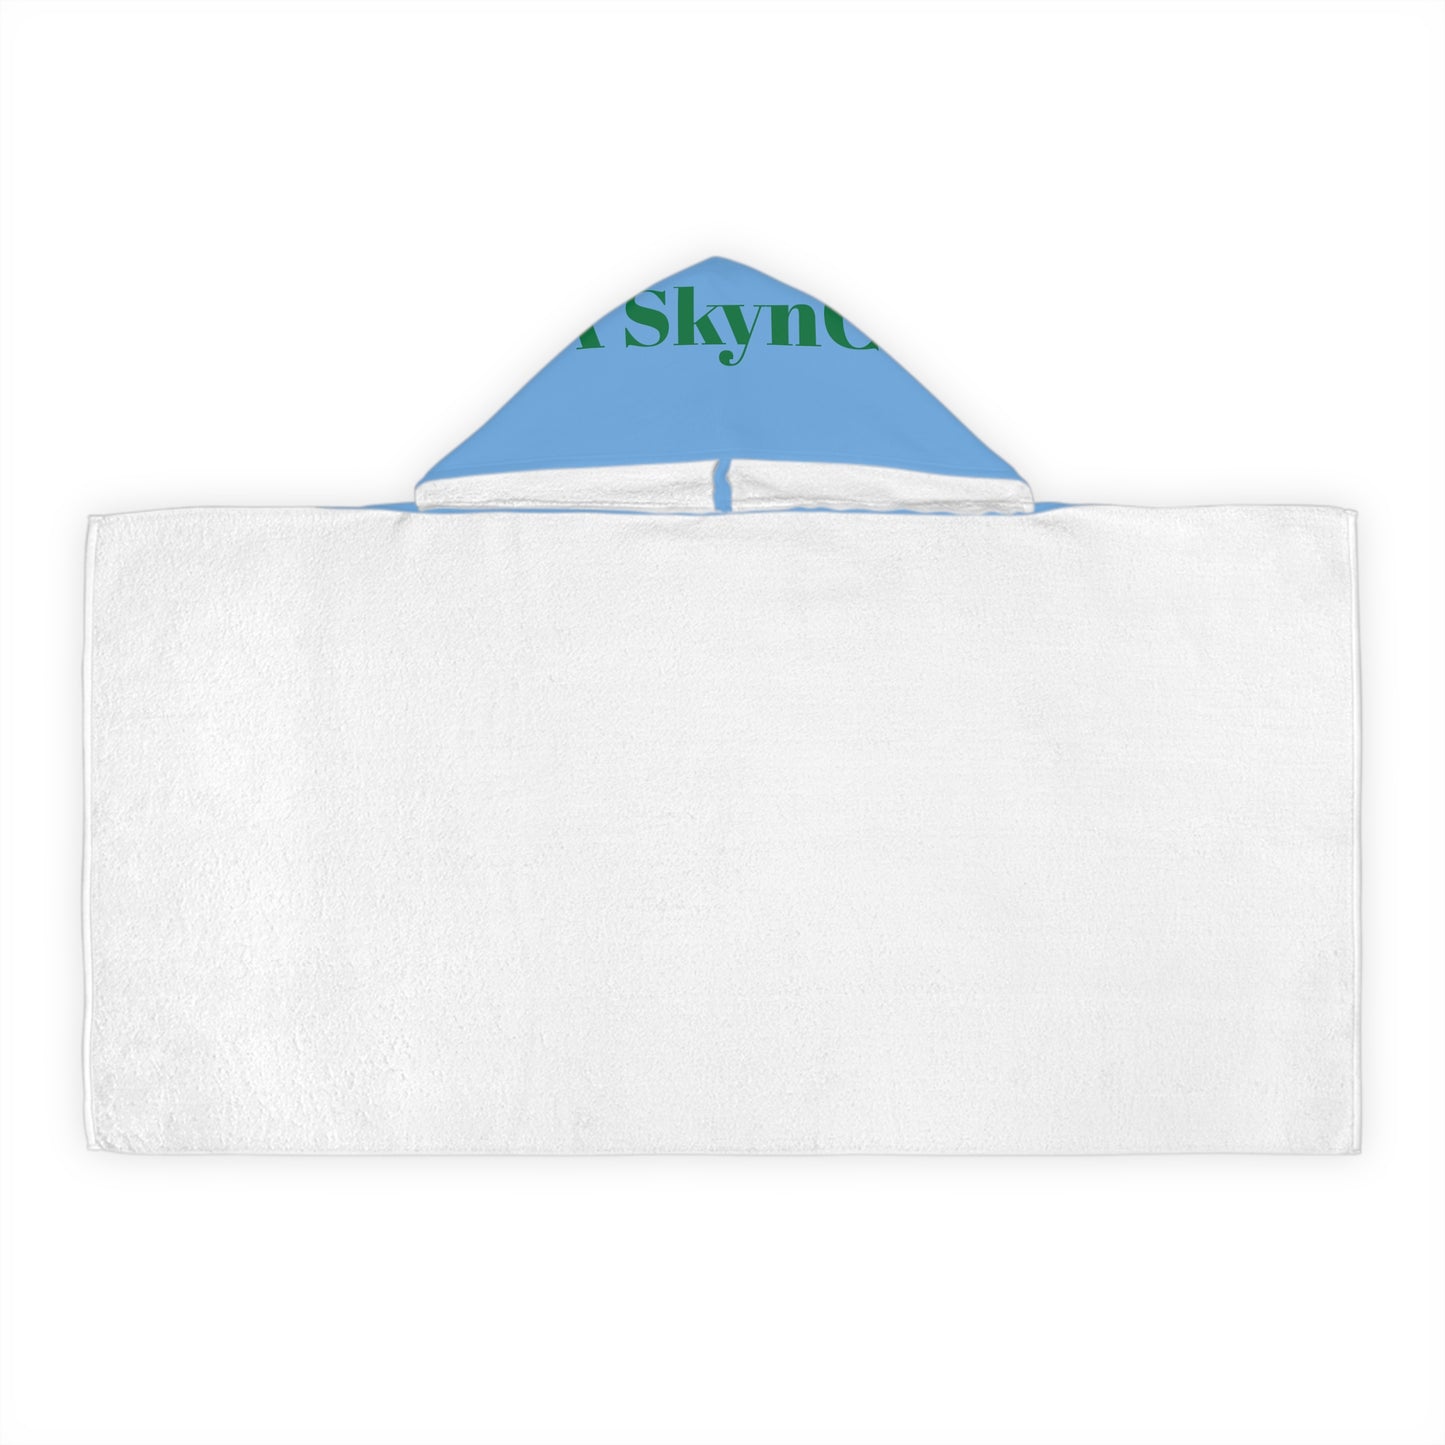 Youth Hooded Towel